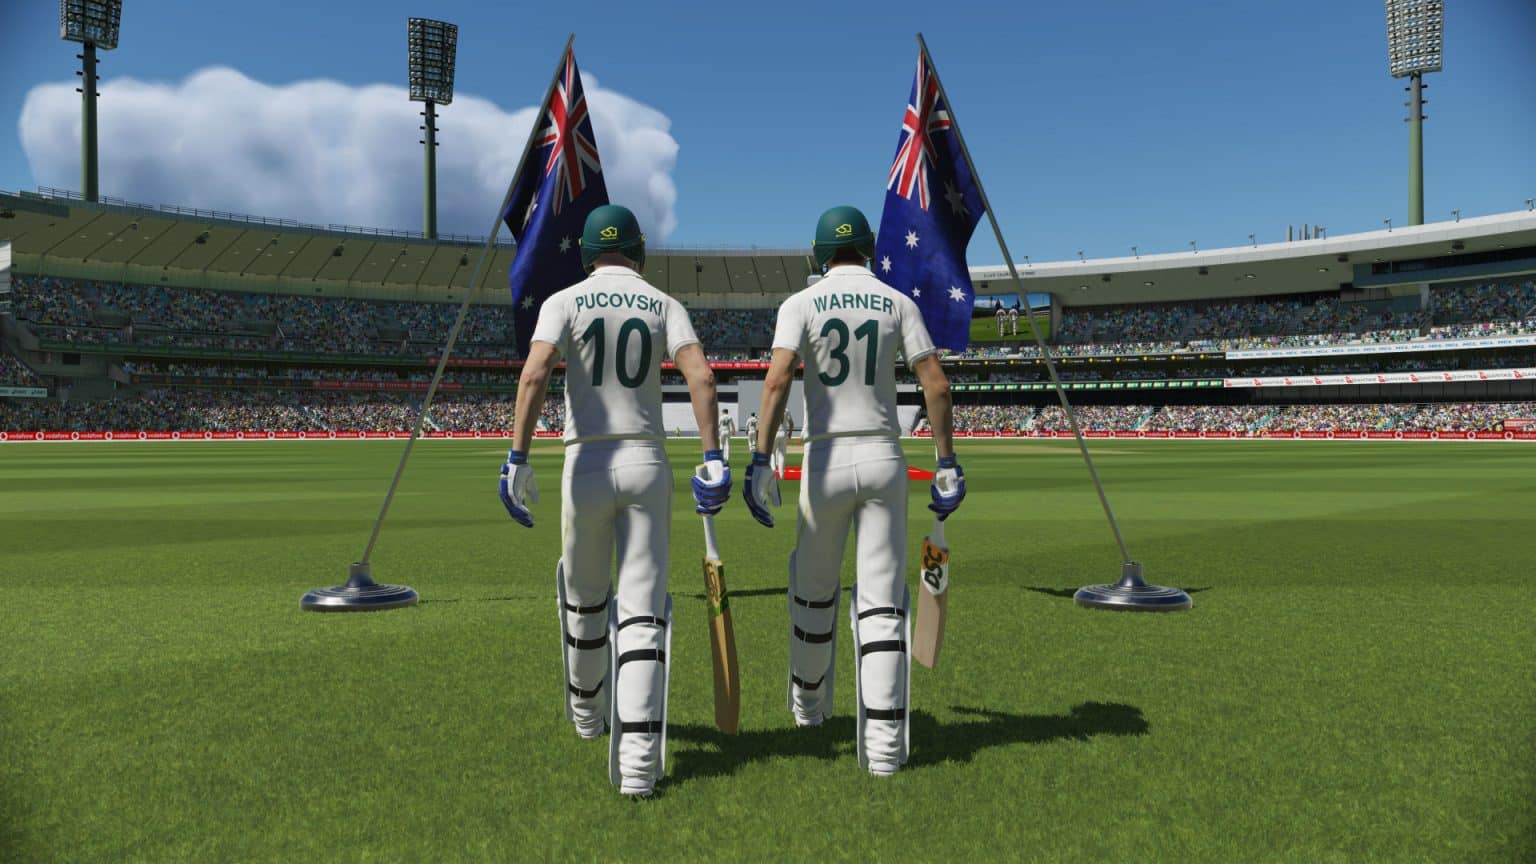 cricket 22 free download for windows 10